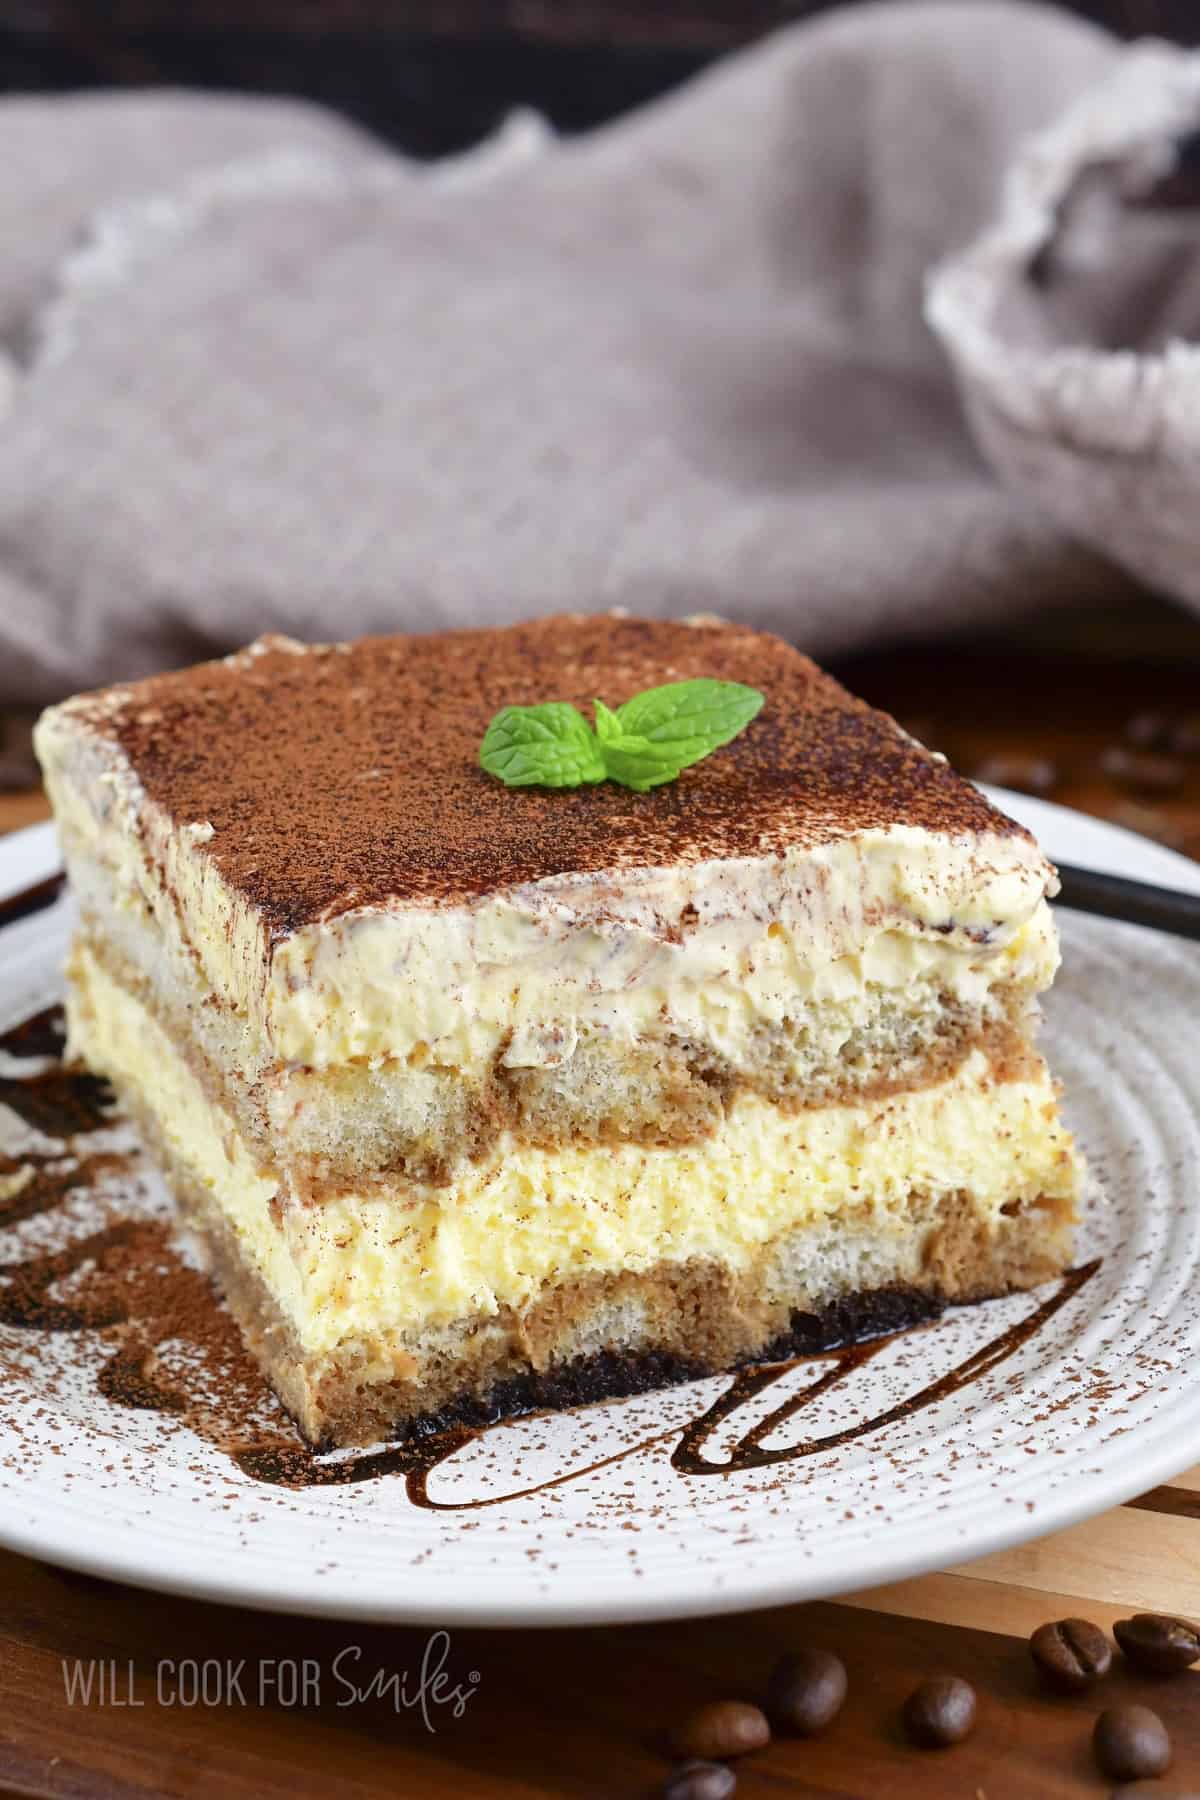 front view of a slice of tiramisu on a plate with chocolate drizze.